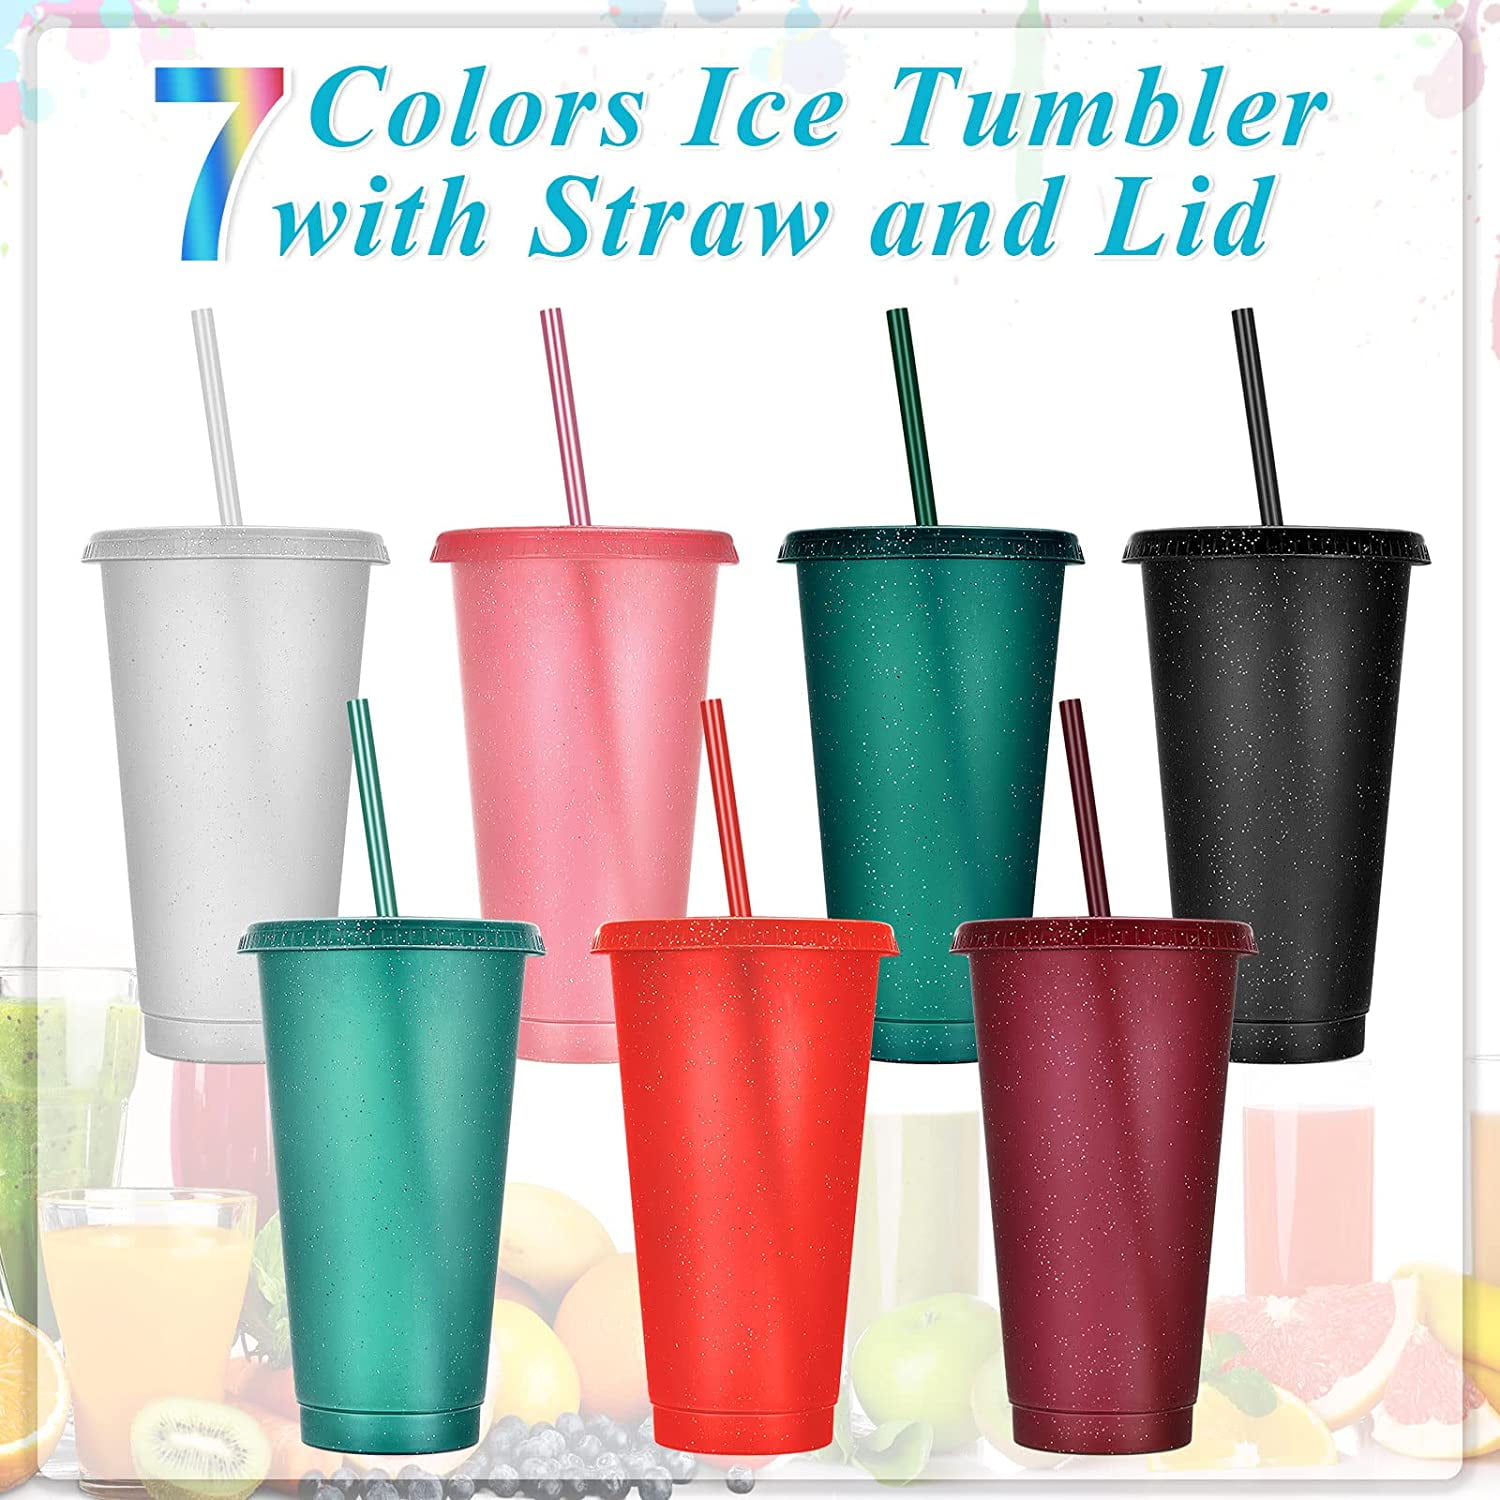 Twsoul 500ml/650ml Insulated Double Wall Plastic Tumbler Cup with Lid,Reusable Summer Cold Drink Iced Coffee Cups with Lids and Straws for Adults Kids